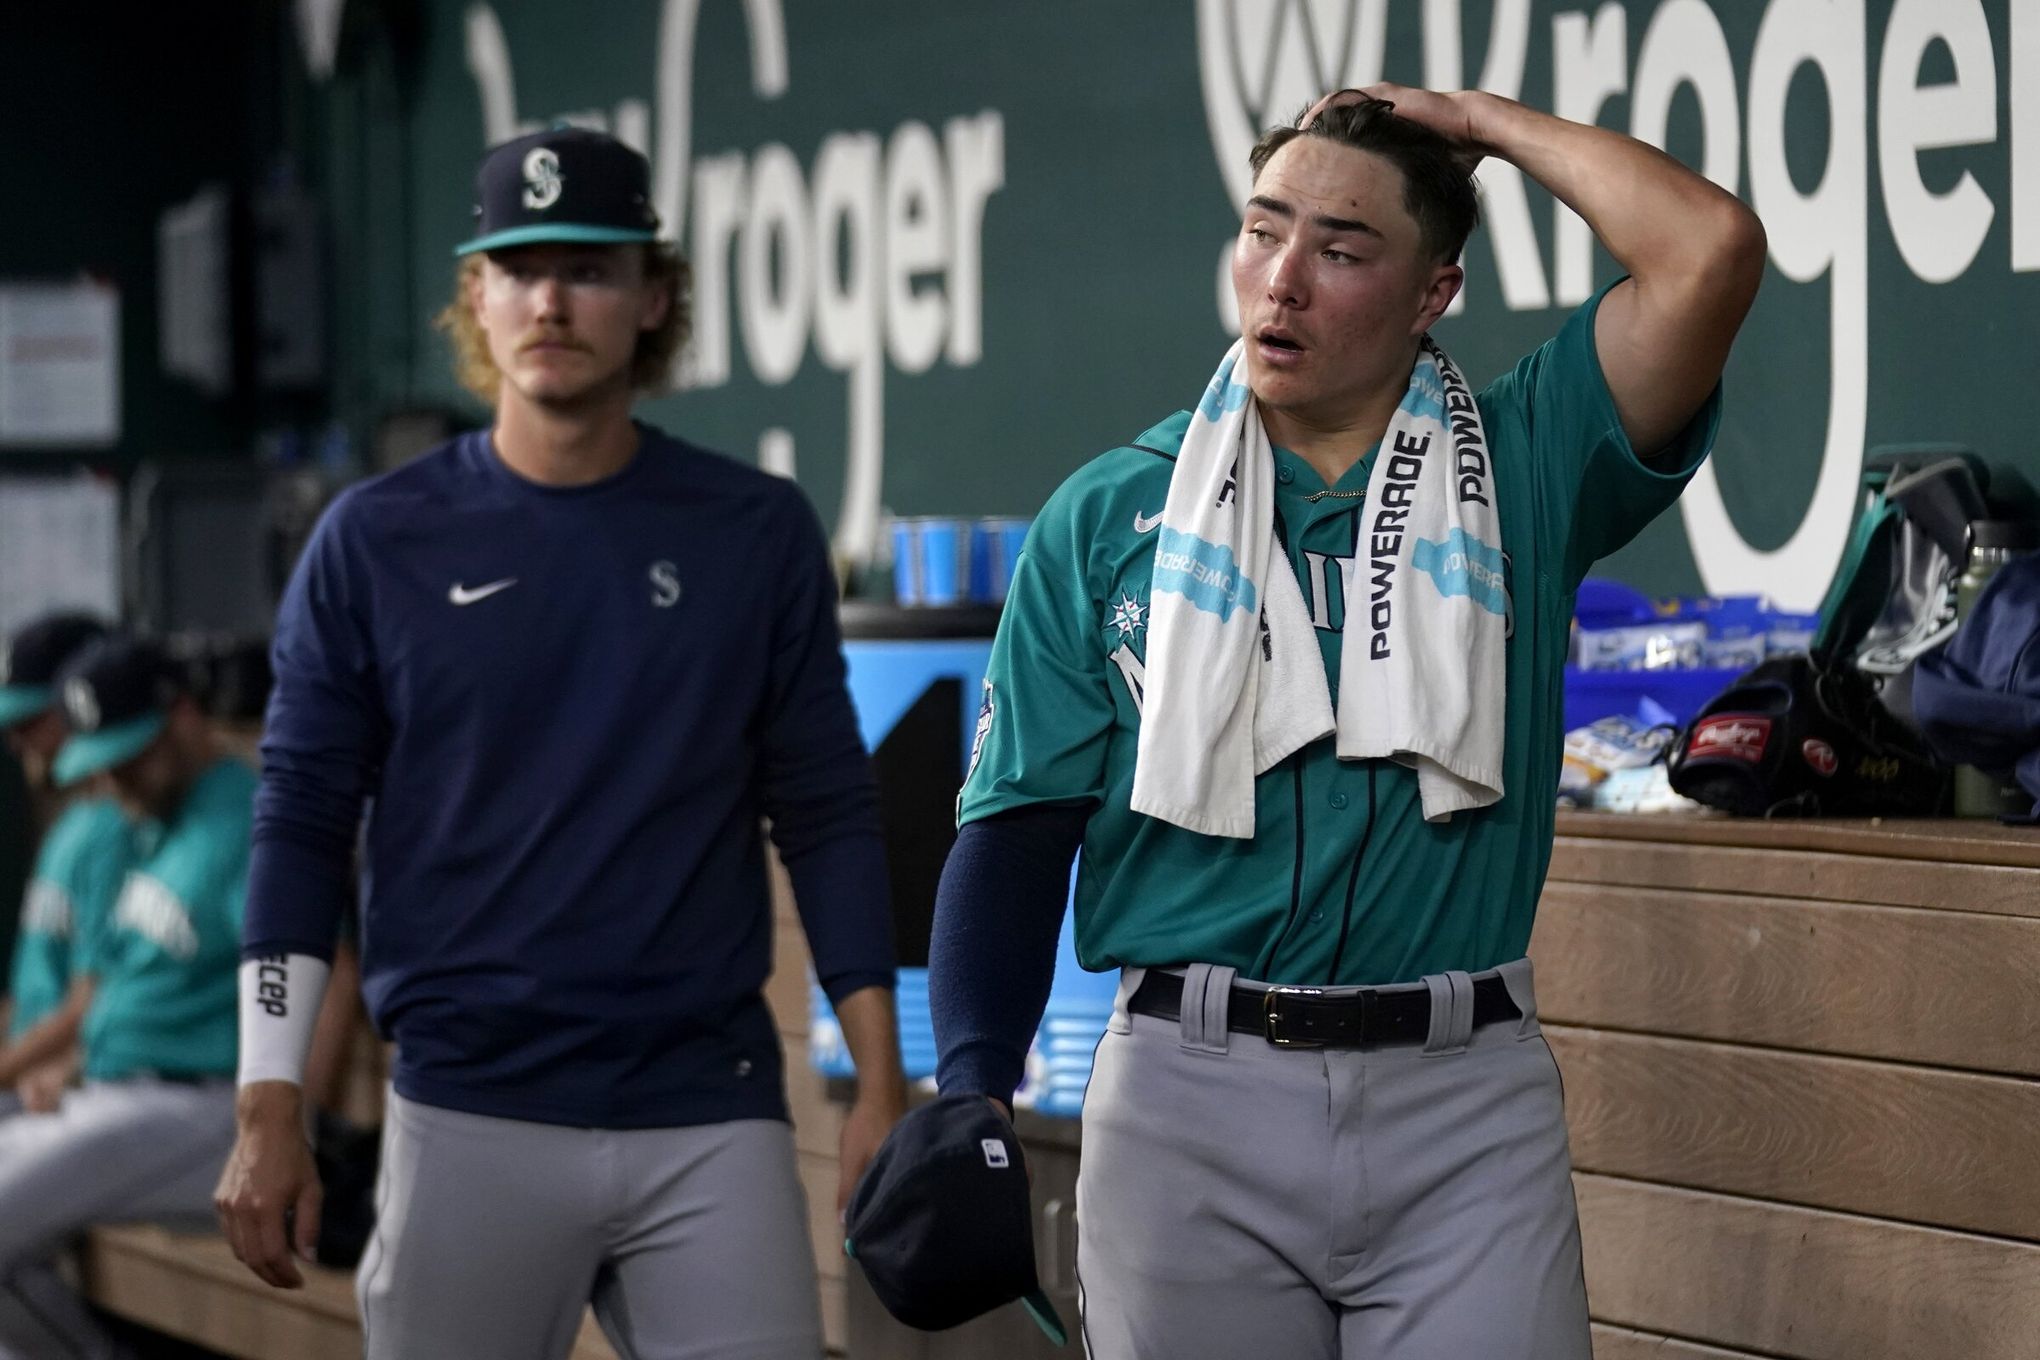 With another loss, playoffs seem further away for Mariners